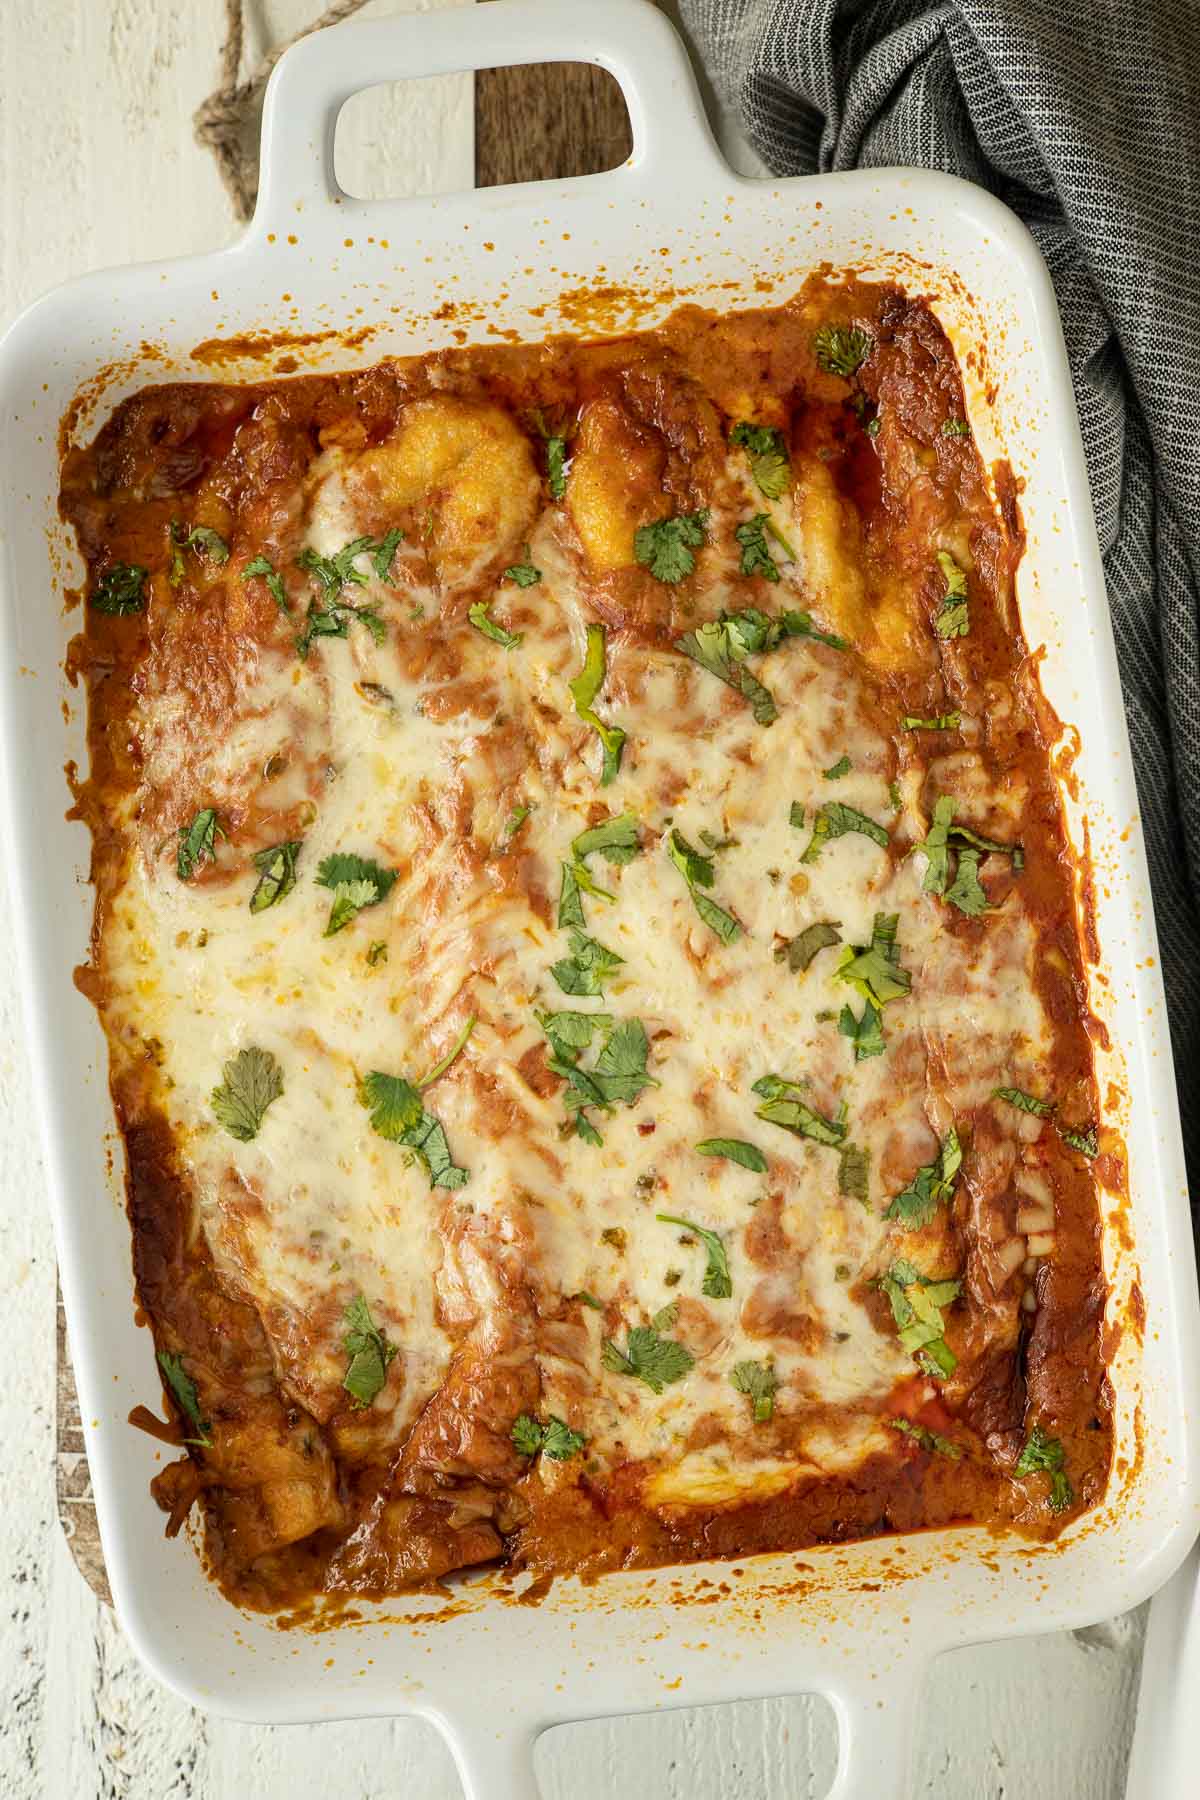 Baked beef enchiladas in red sauce with cheese and cilantro.